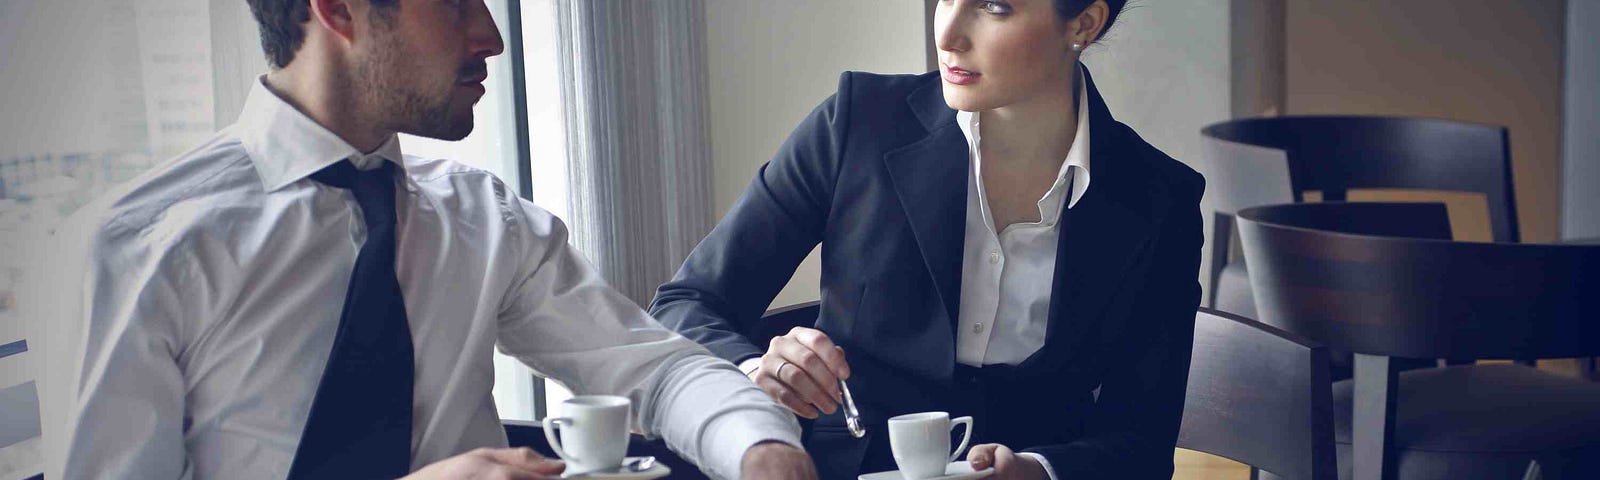 Business man and woman meeting over coffe